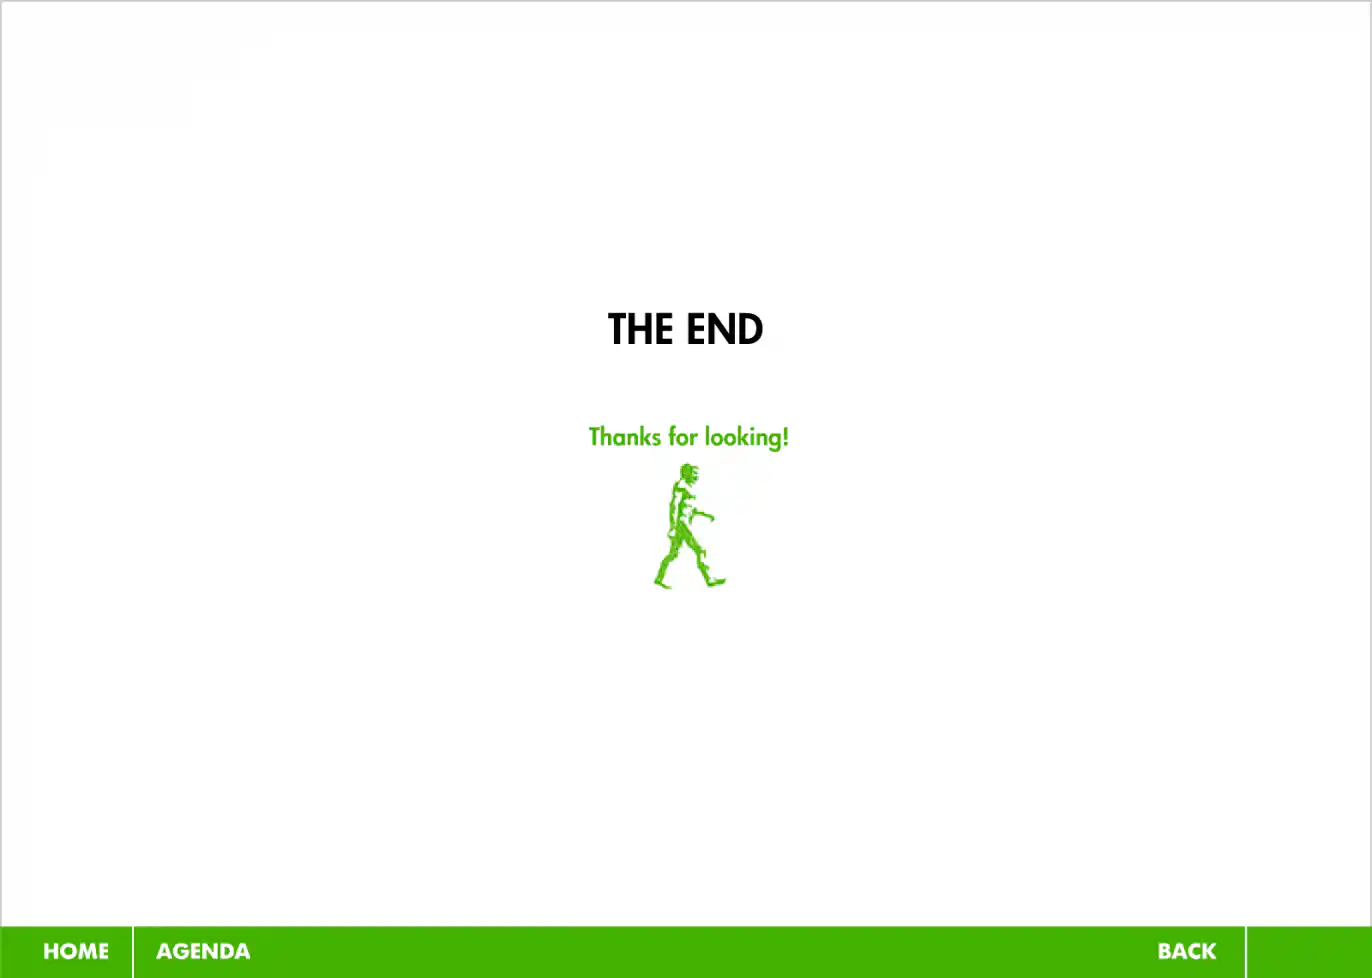 Slide 27: The End - Thanks for Looking